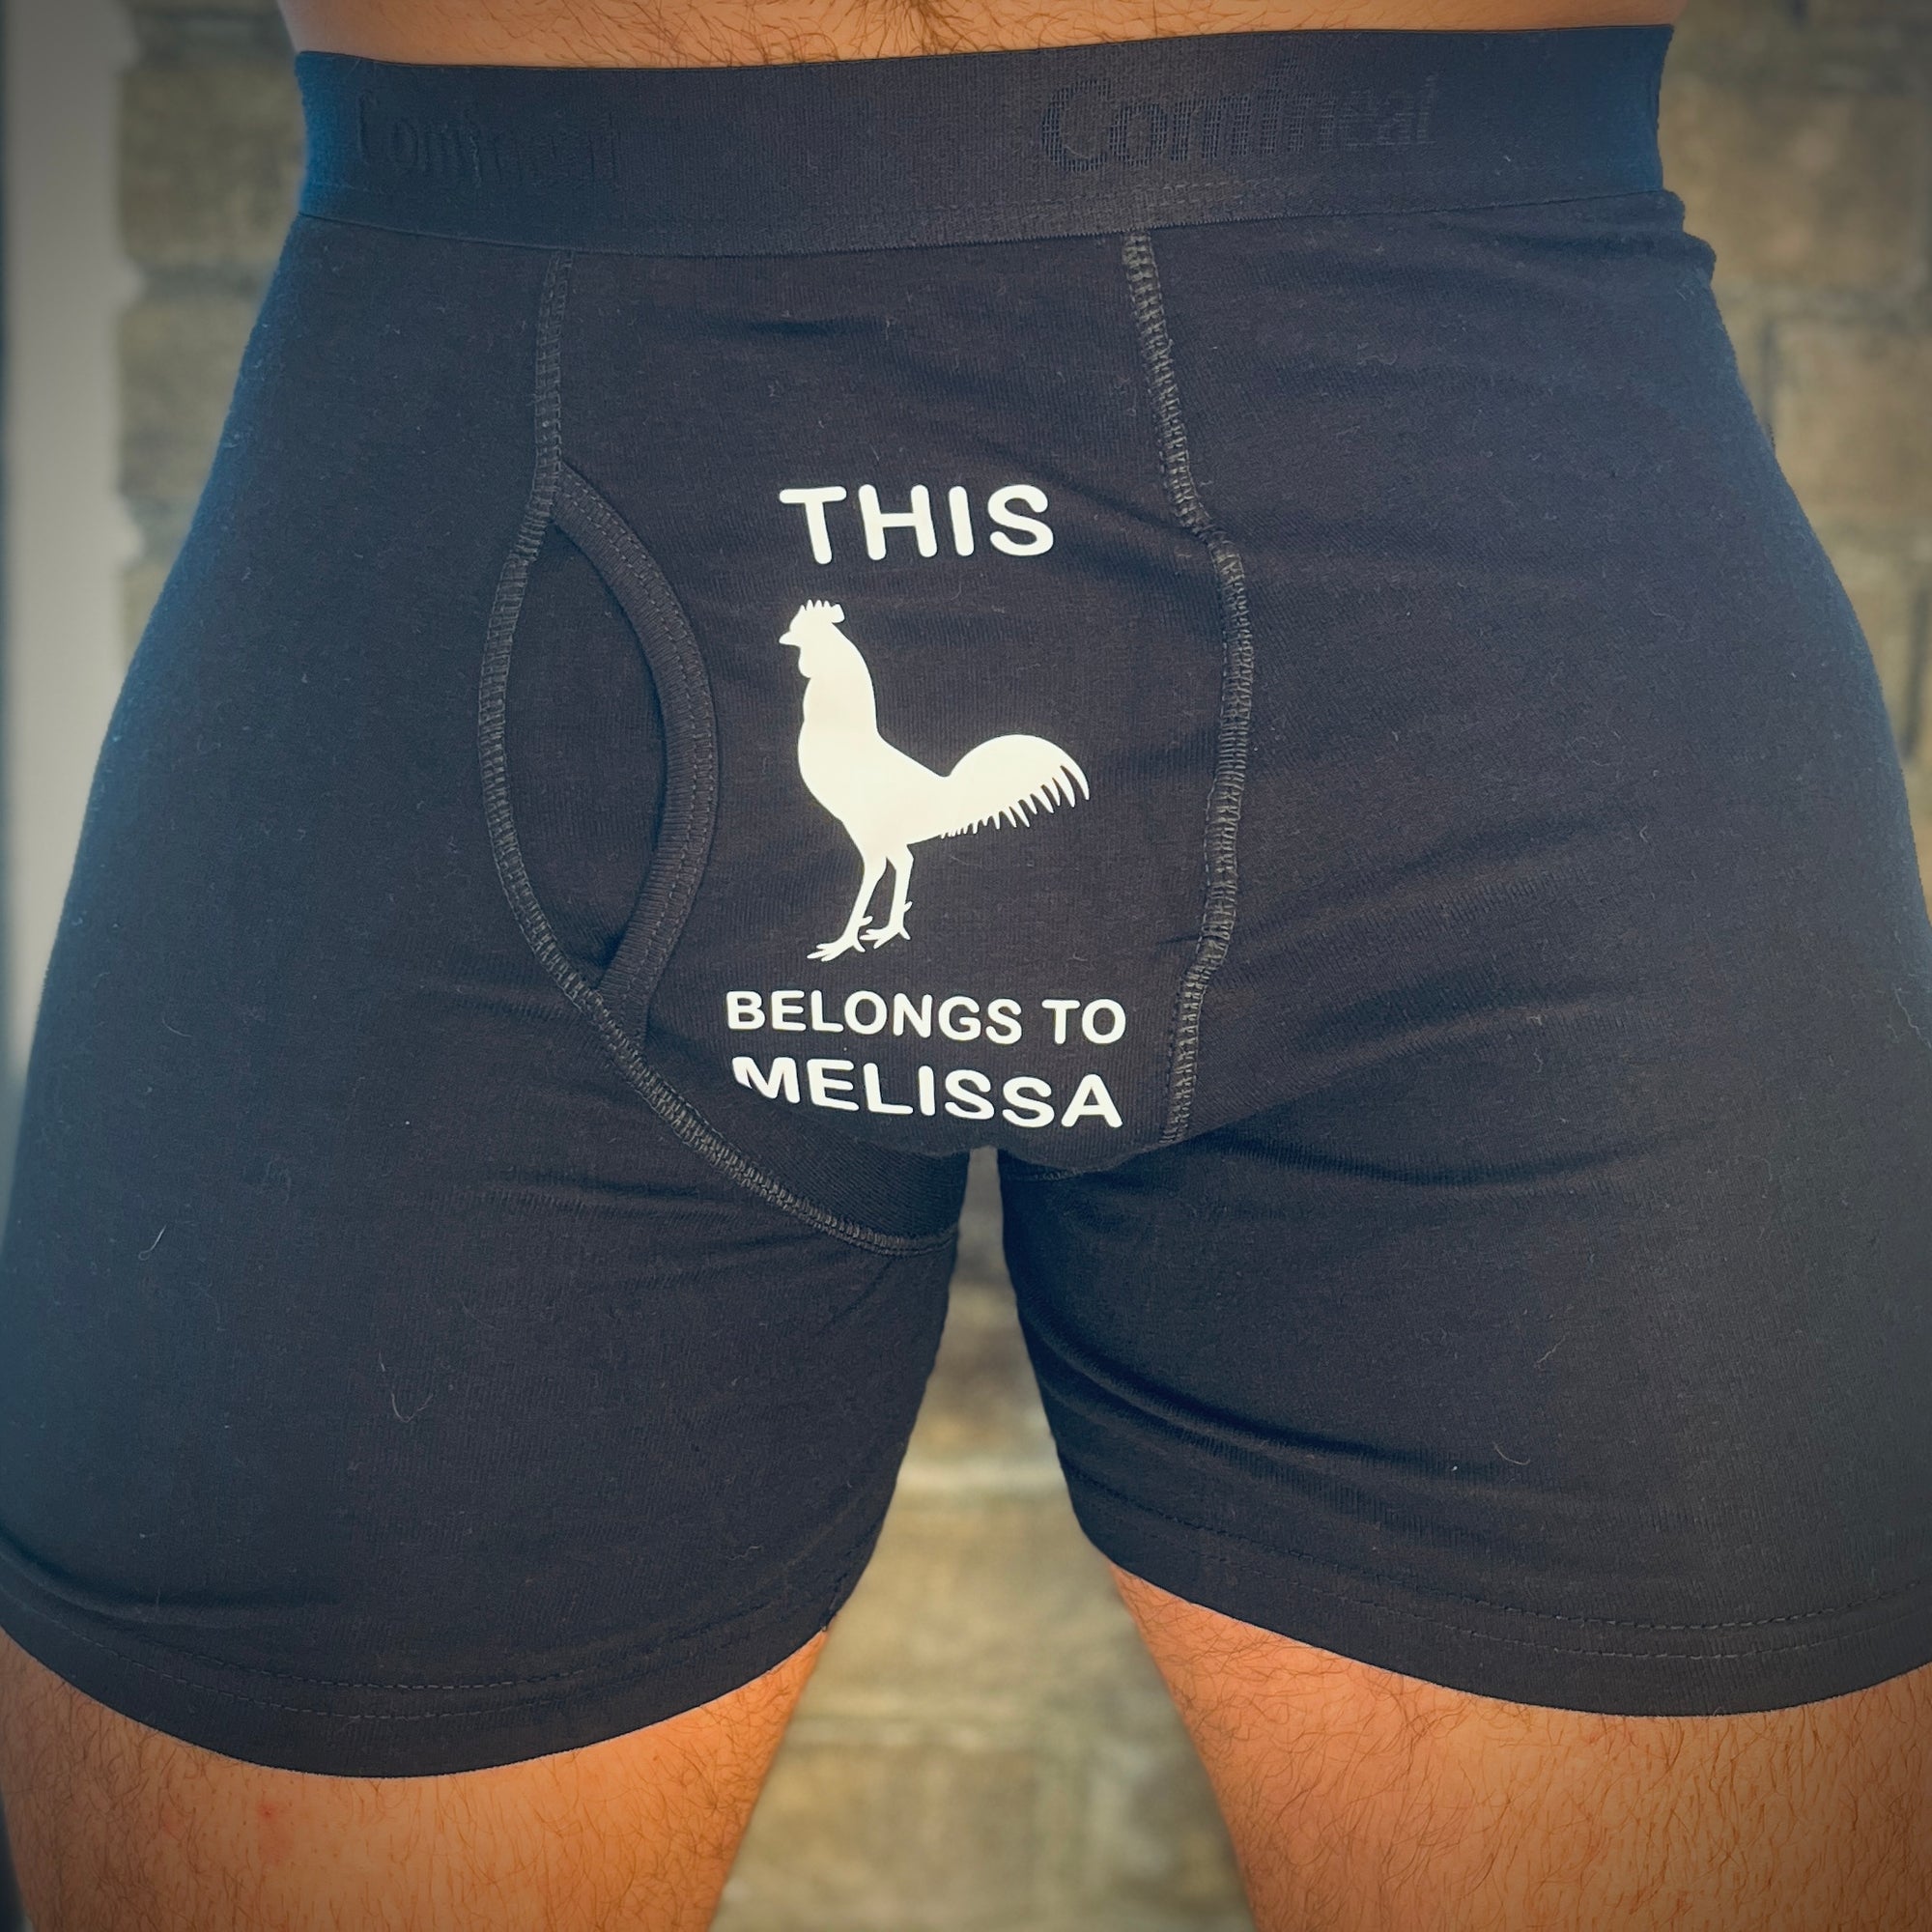 PERSONALISED BOXER BRIEFS GIFT ANNIVERSARY WEDDING PARTY ORIGINAL